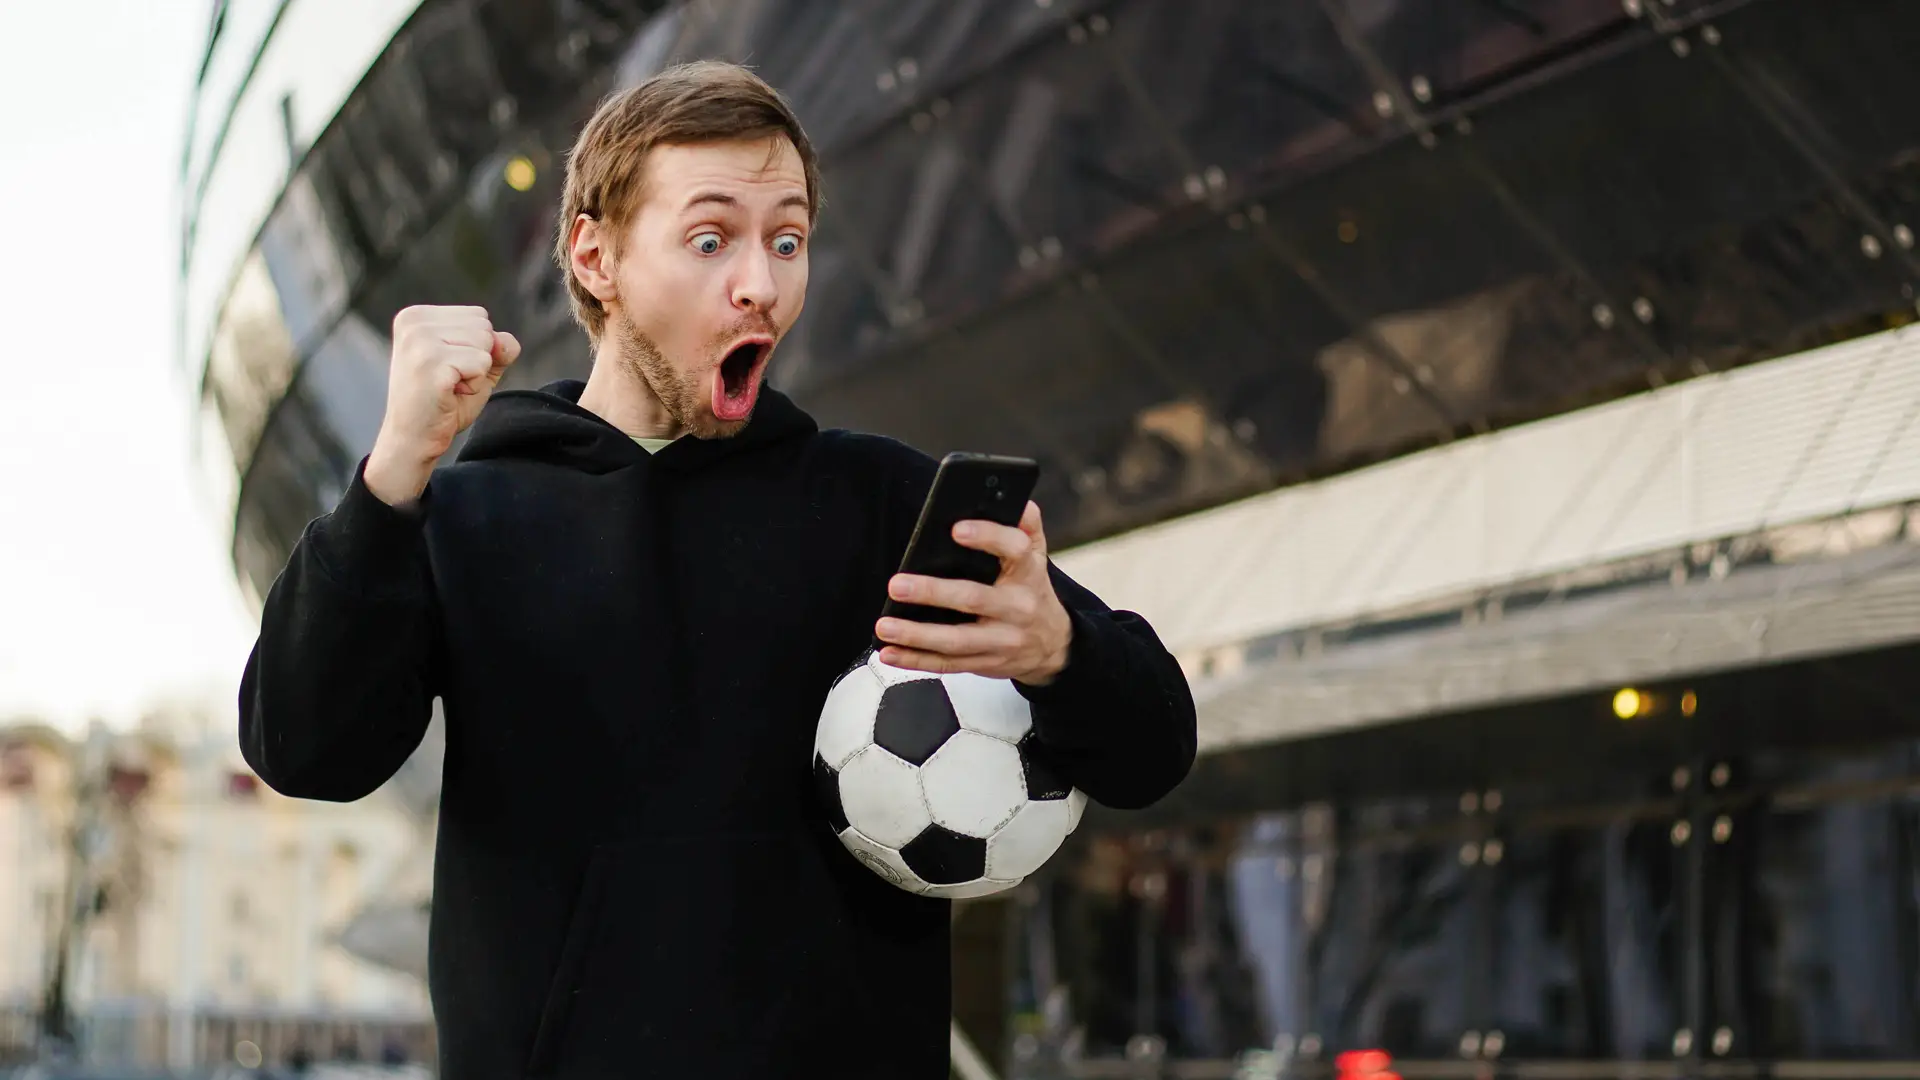 Boy celebrating a goal with his phone because he knows how to cast BT sport